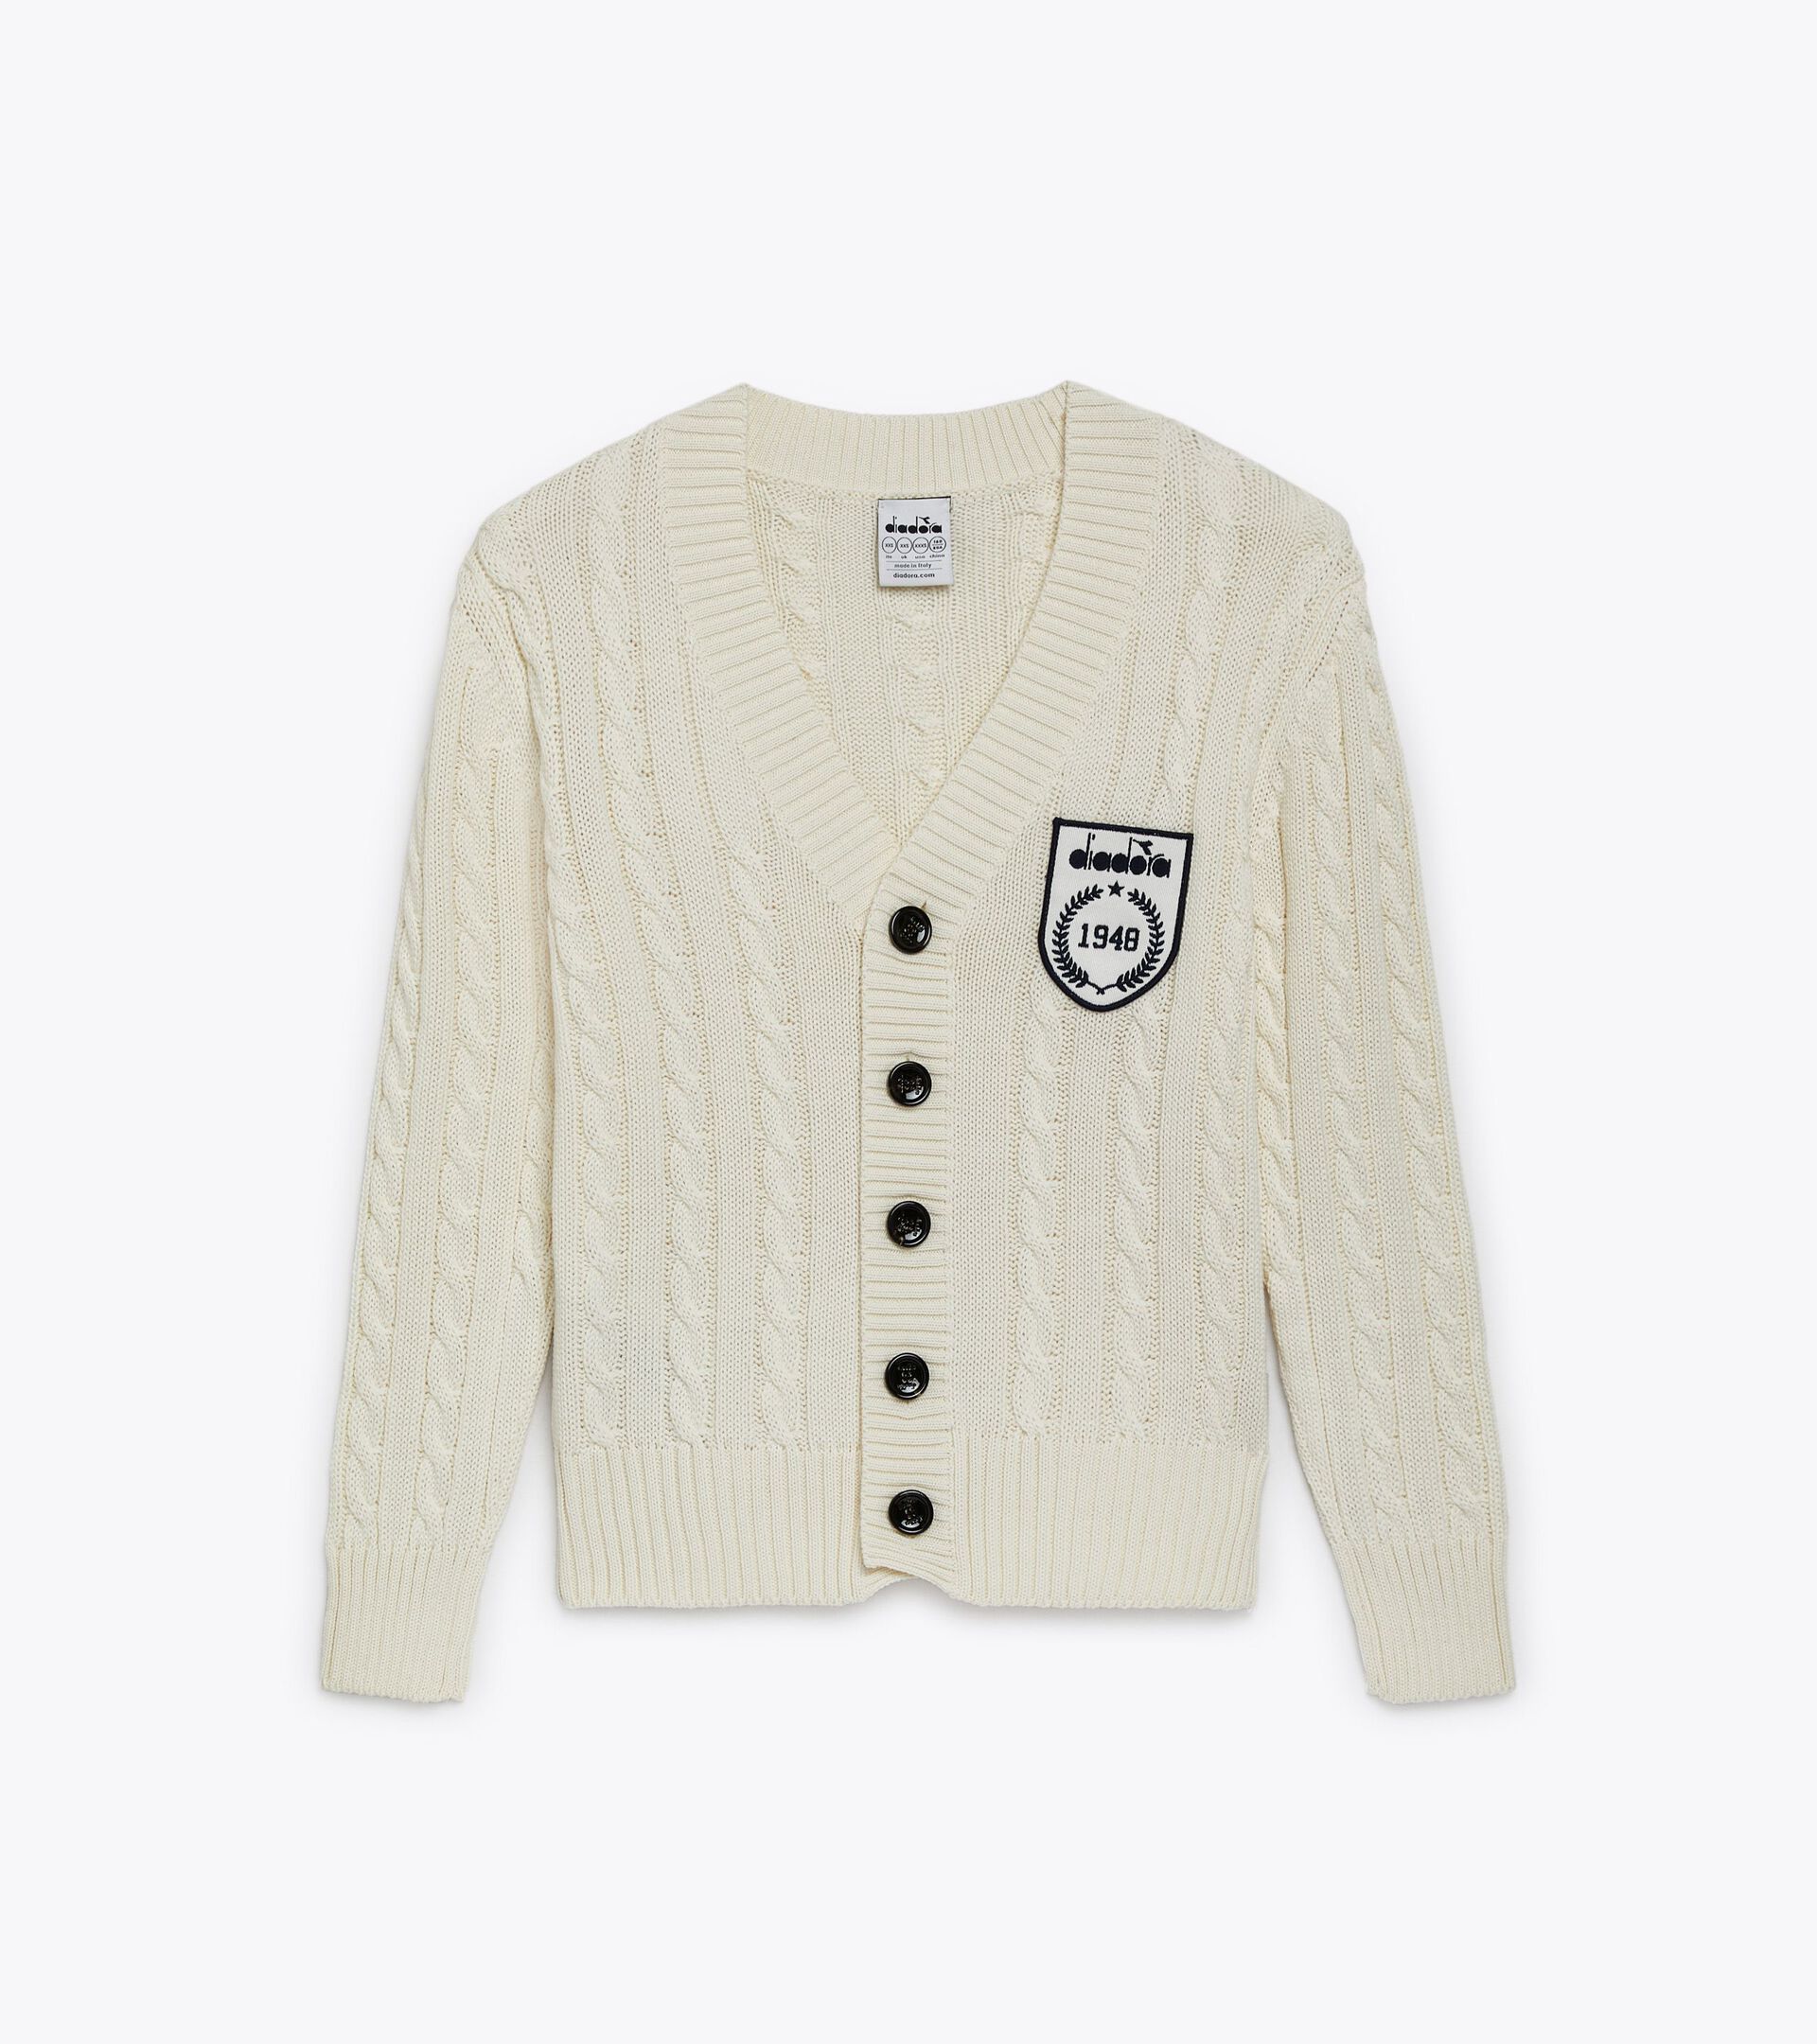 Cardigan - Made in Italy - Gender Neutral CARDIGAN LEGACY BLANCHE VANILLE GLACE - Diadora